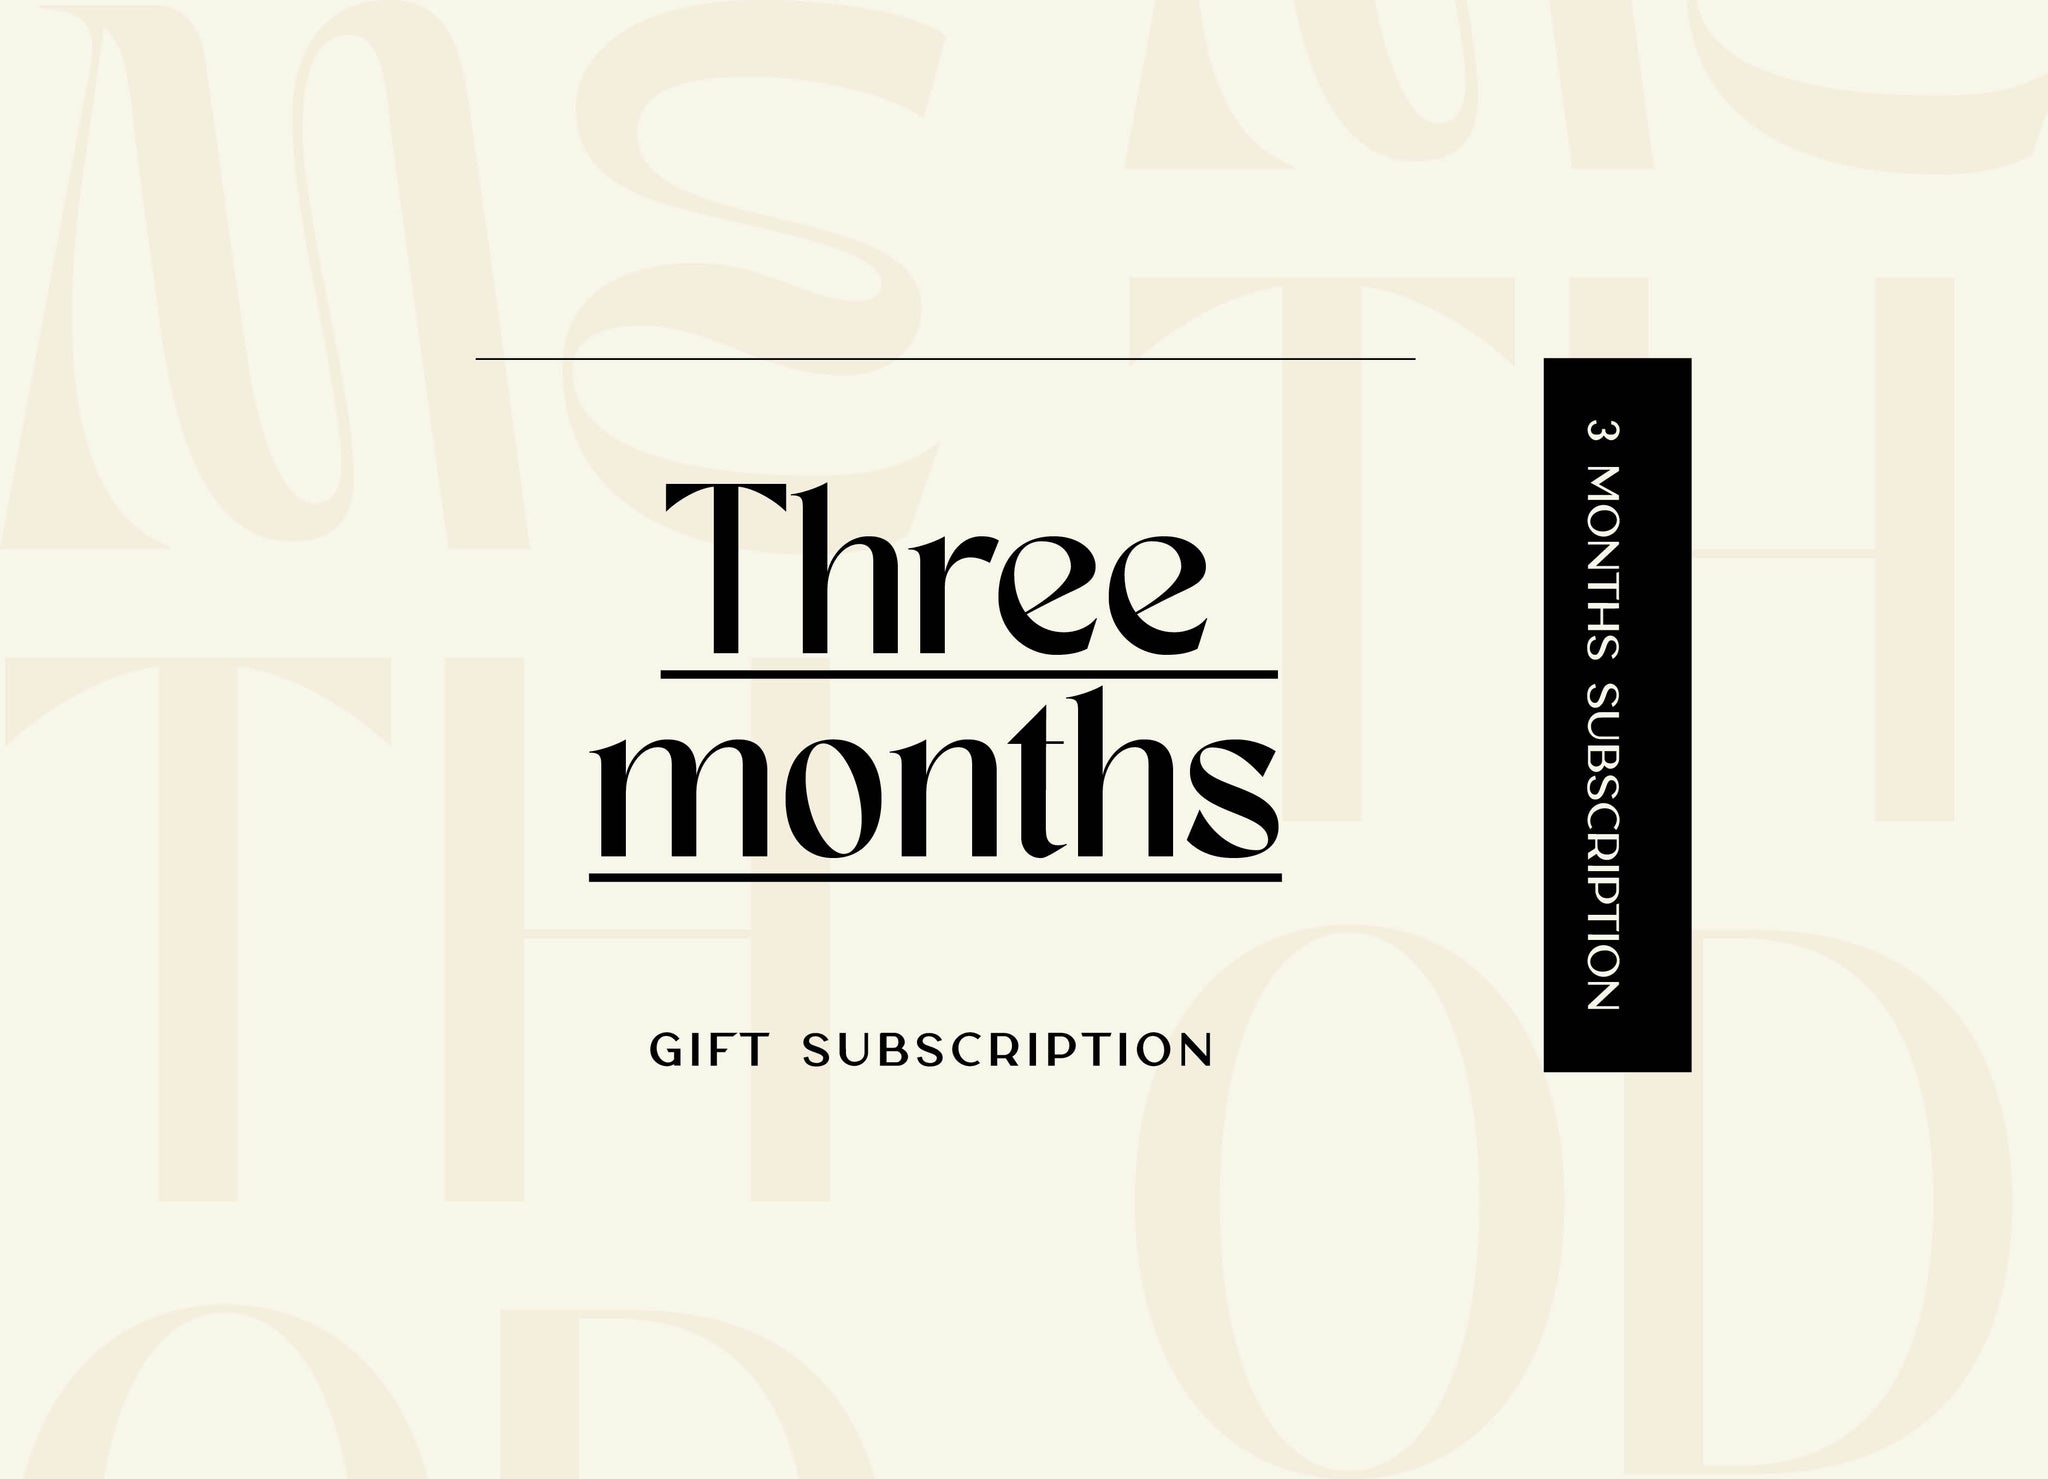 Three Month Gift Subscription